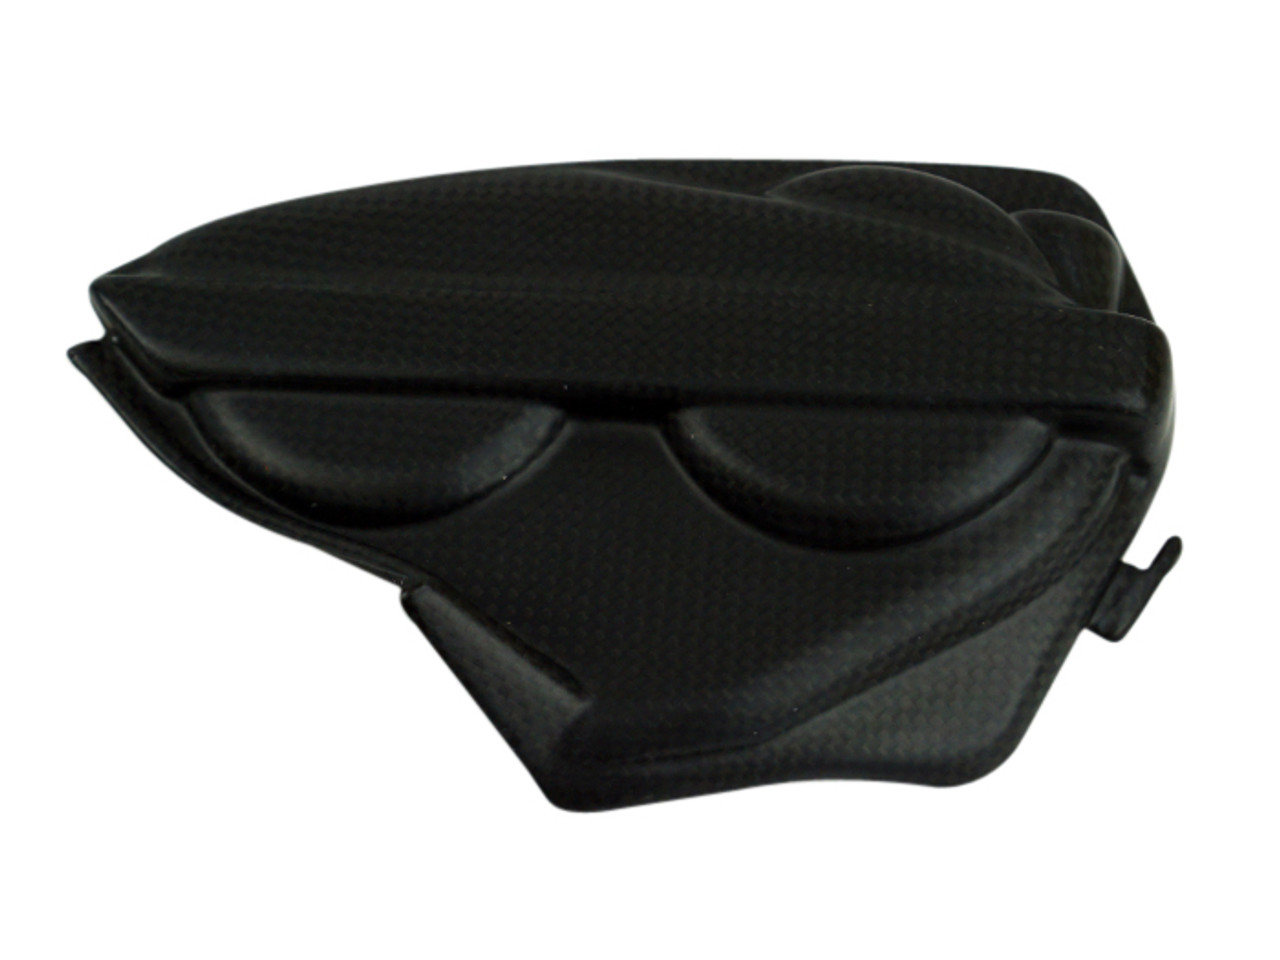 Engine Cover Left Hand Side in Matte Plain Weave shown for Ducati Panigale 899, 959